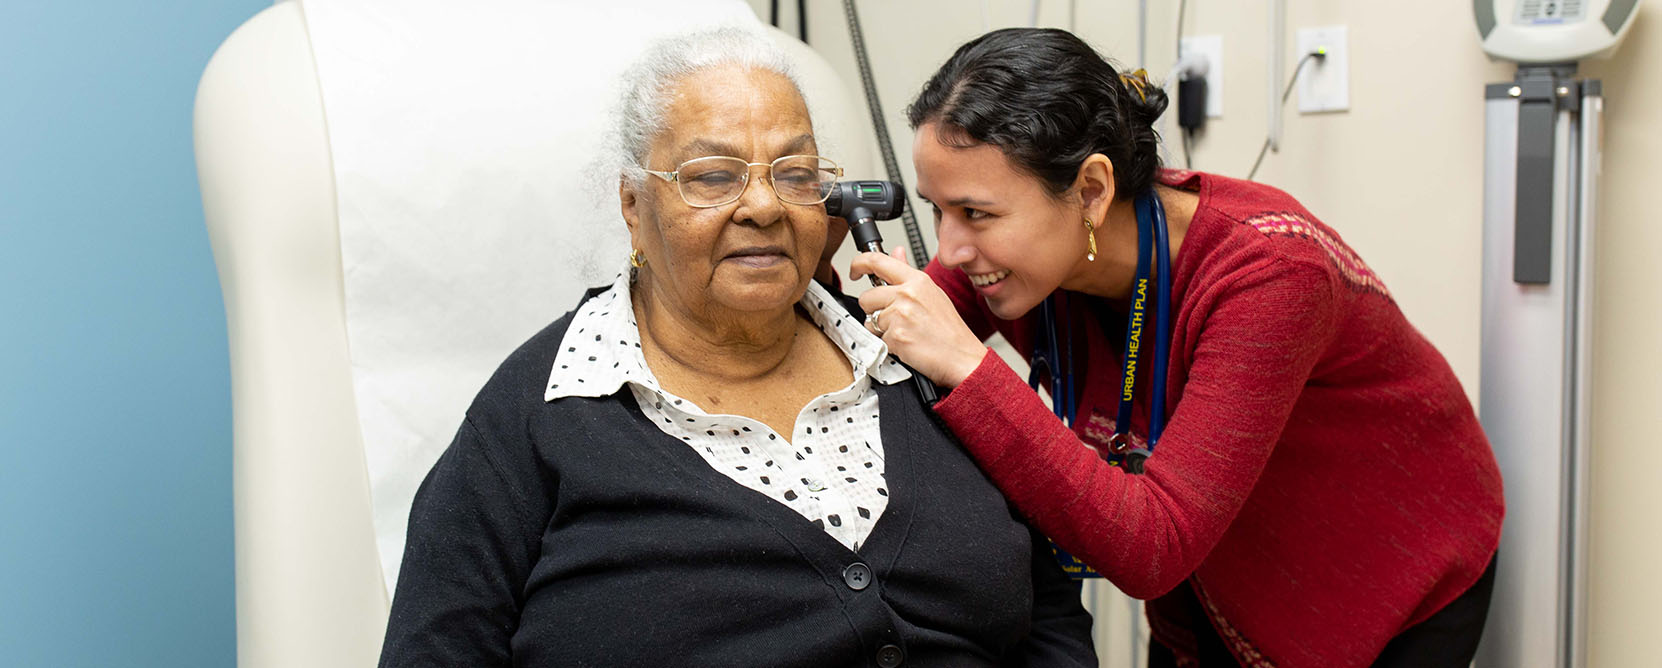 Older adult patient has her ears examined